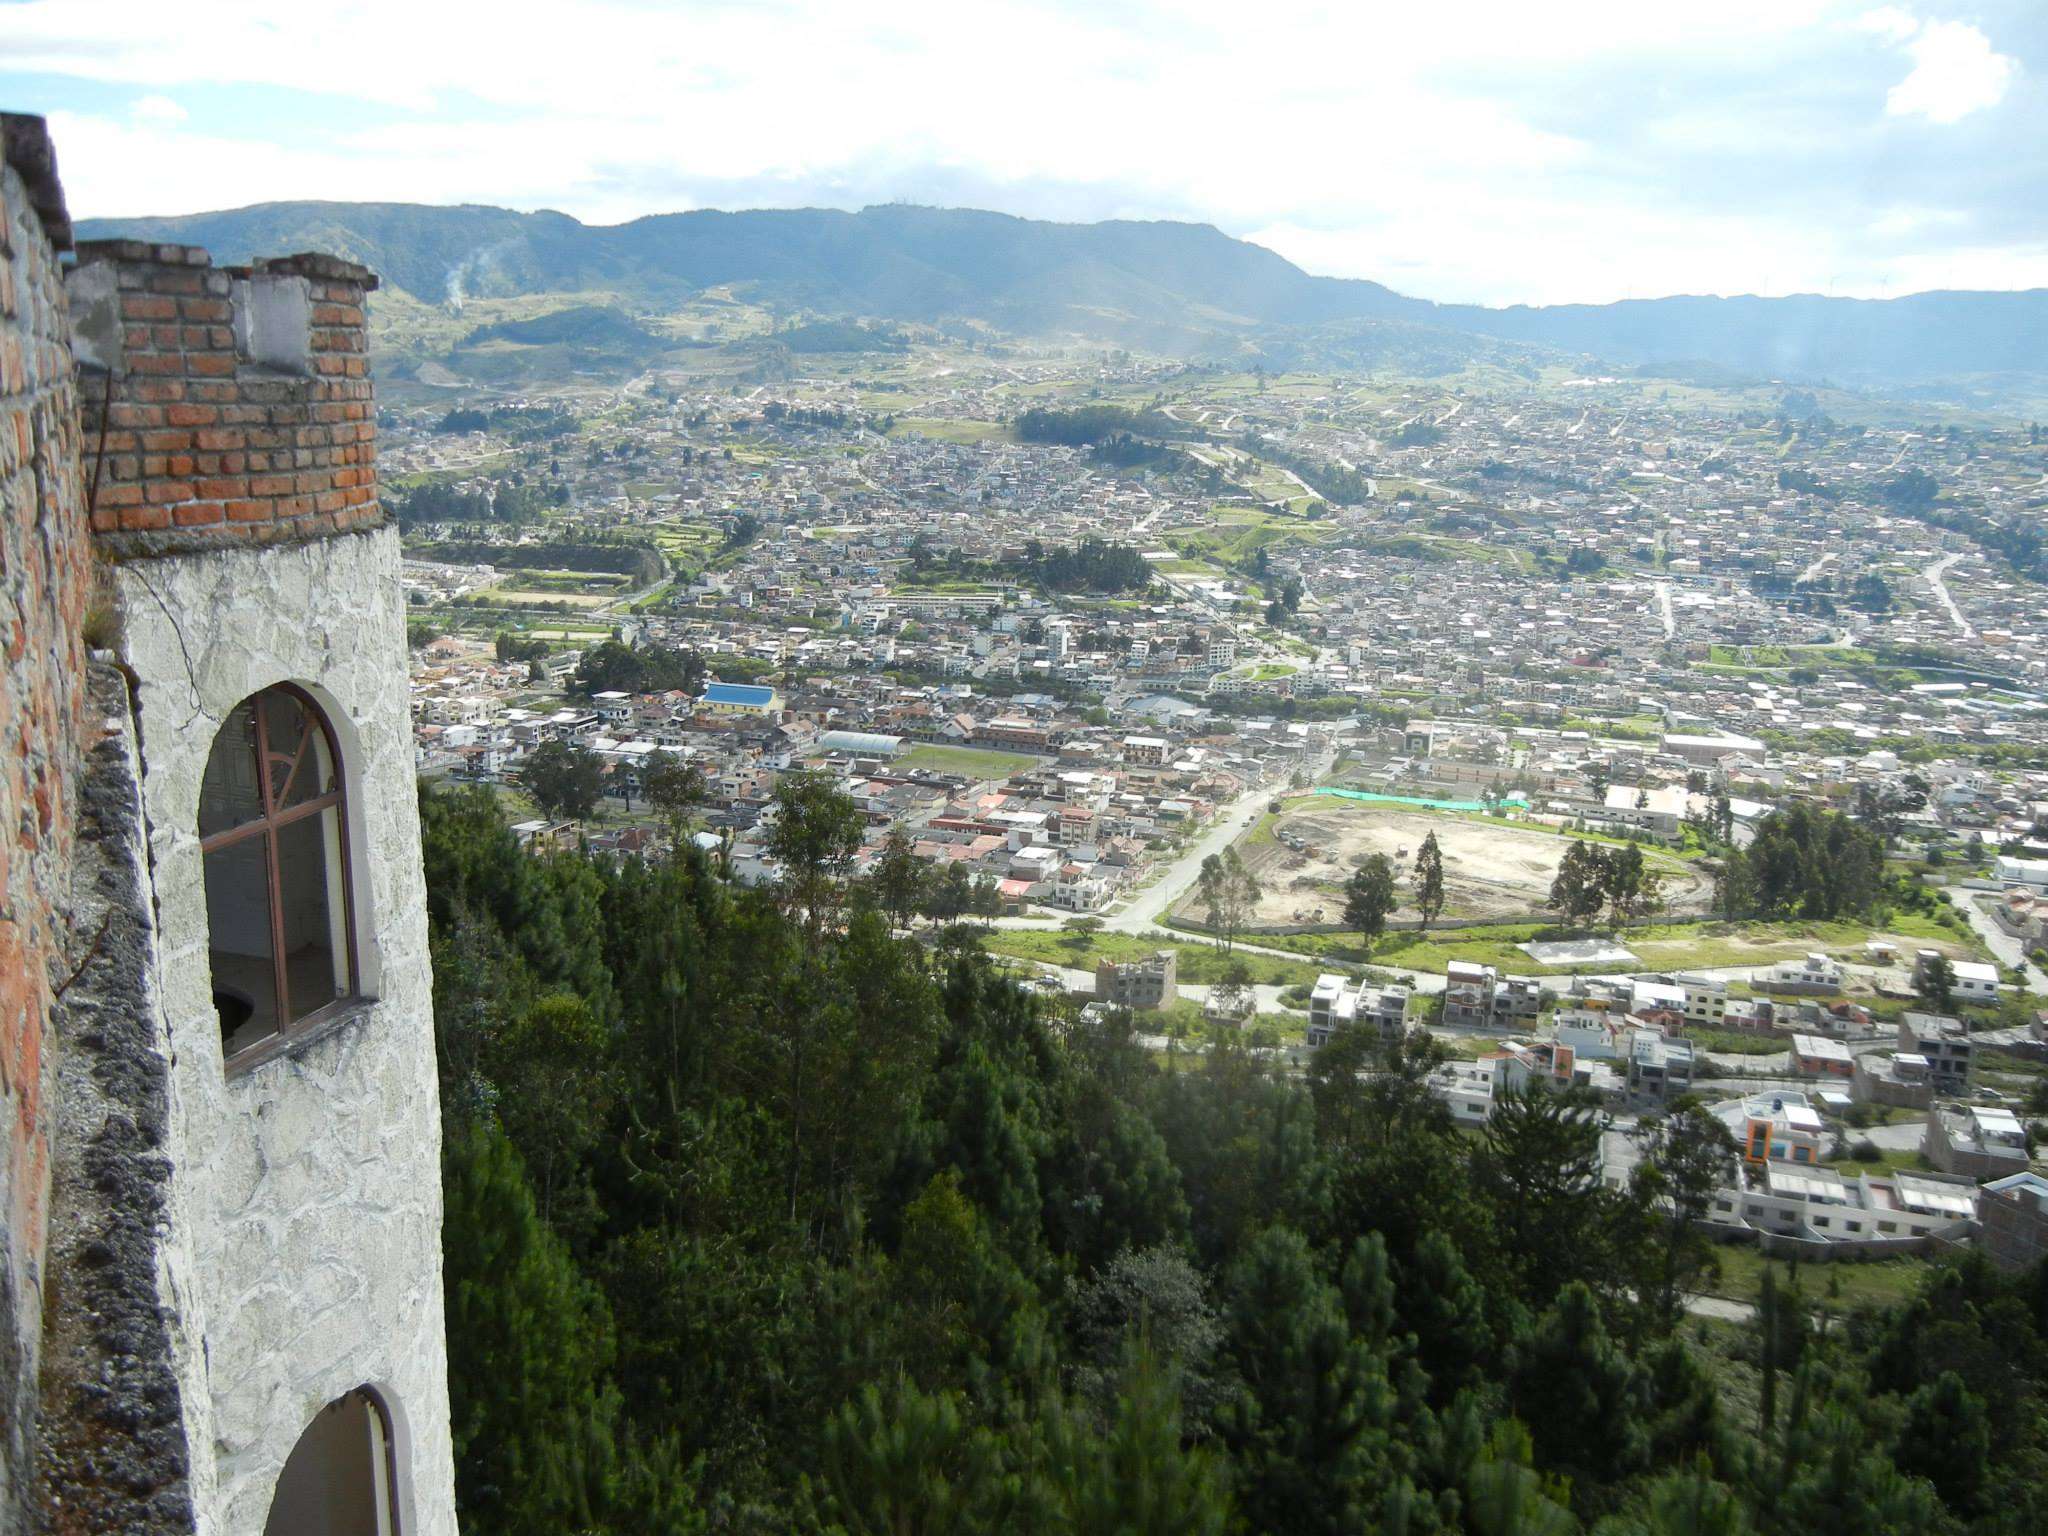 View of Loja from the castle